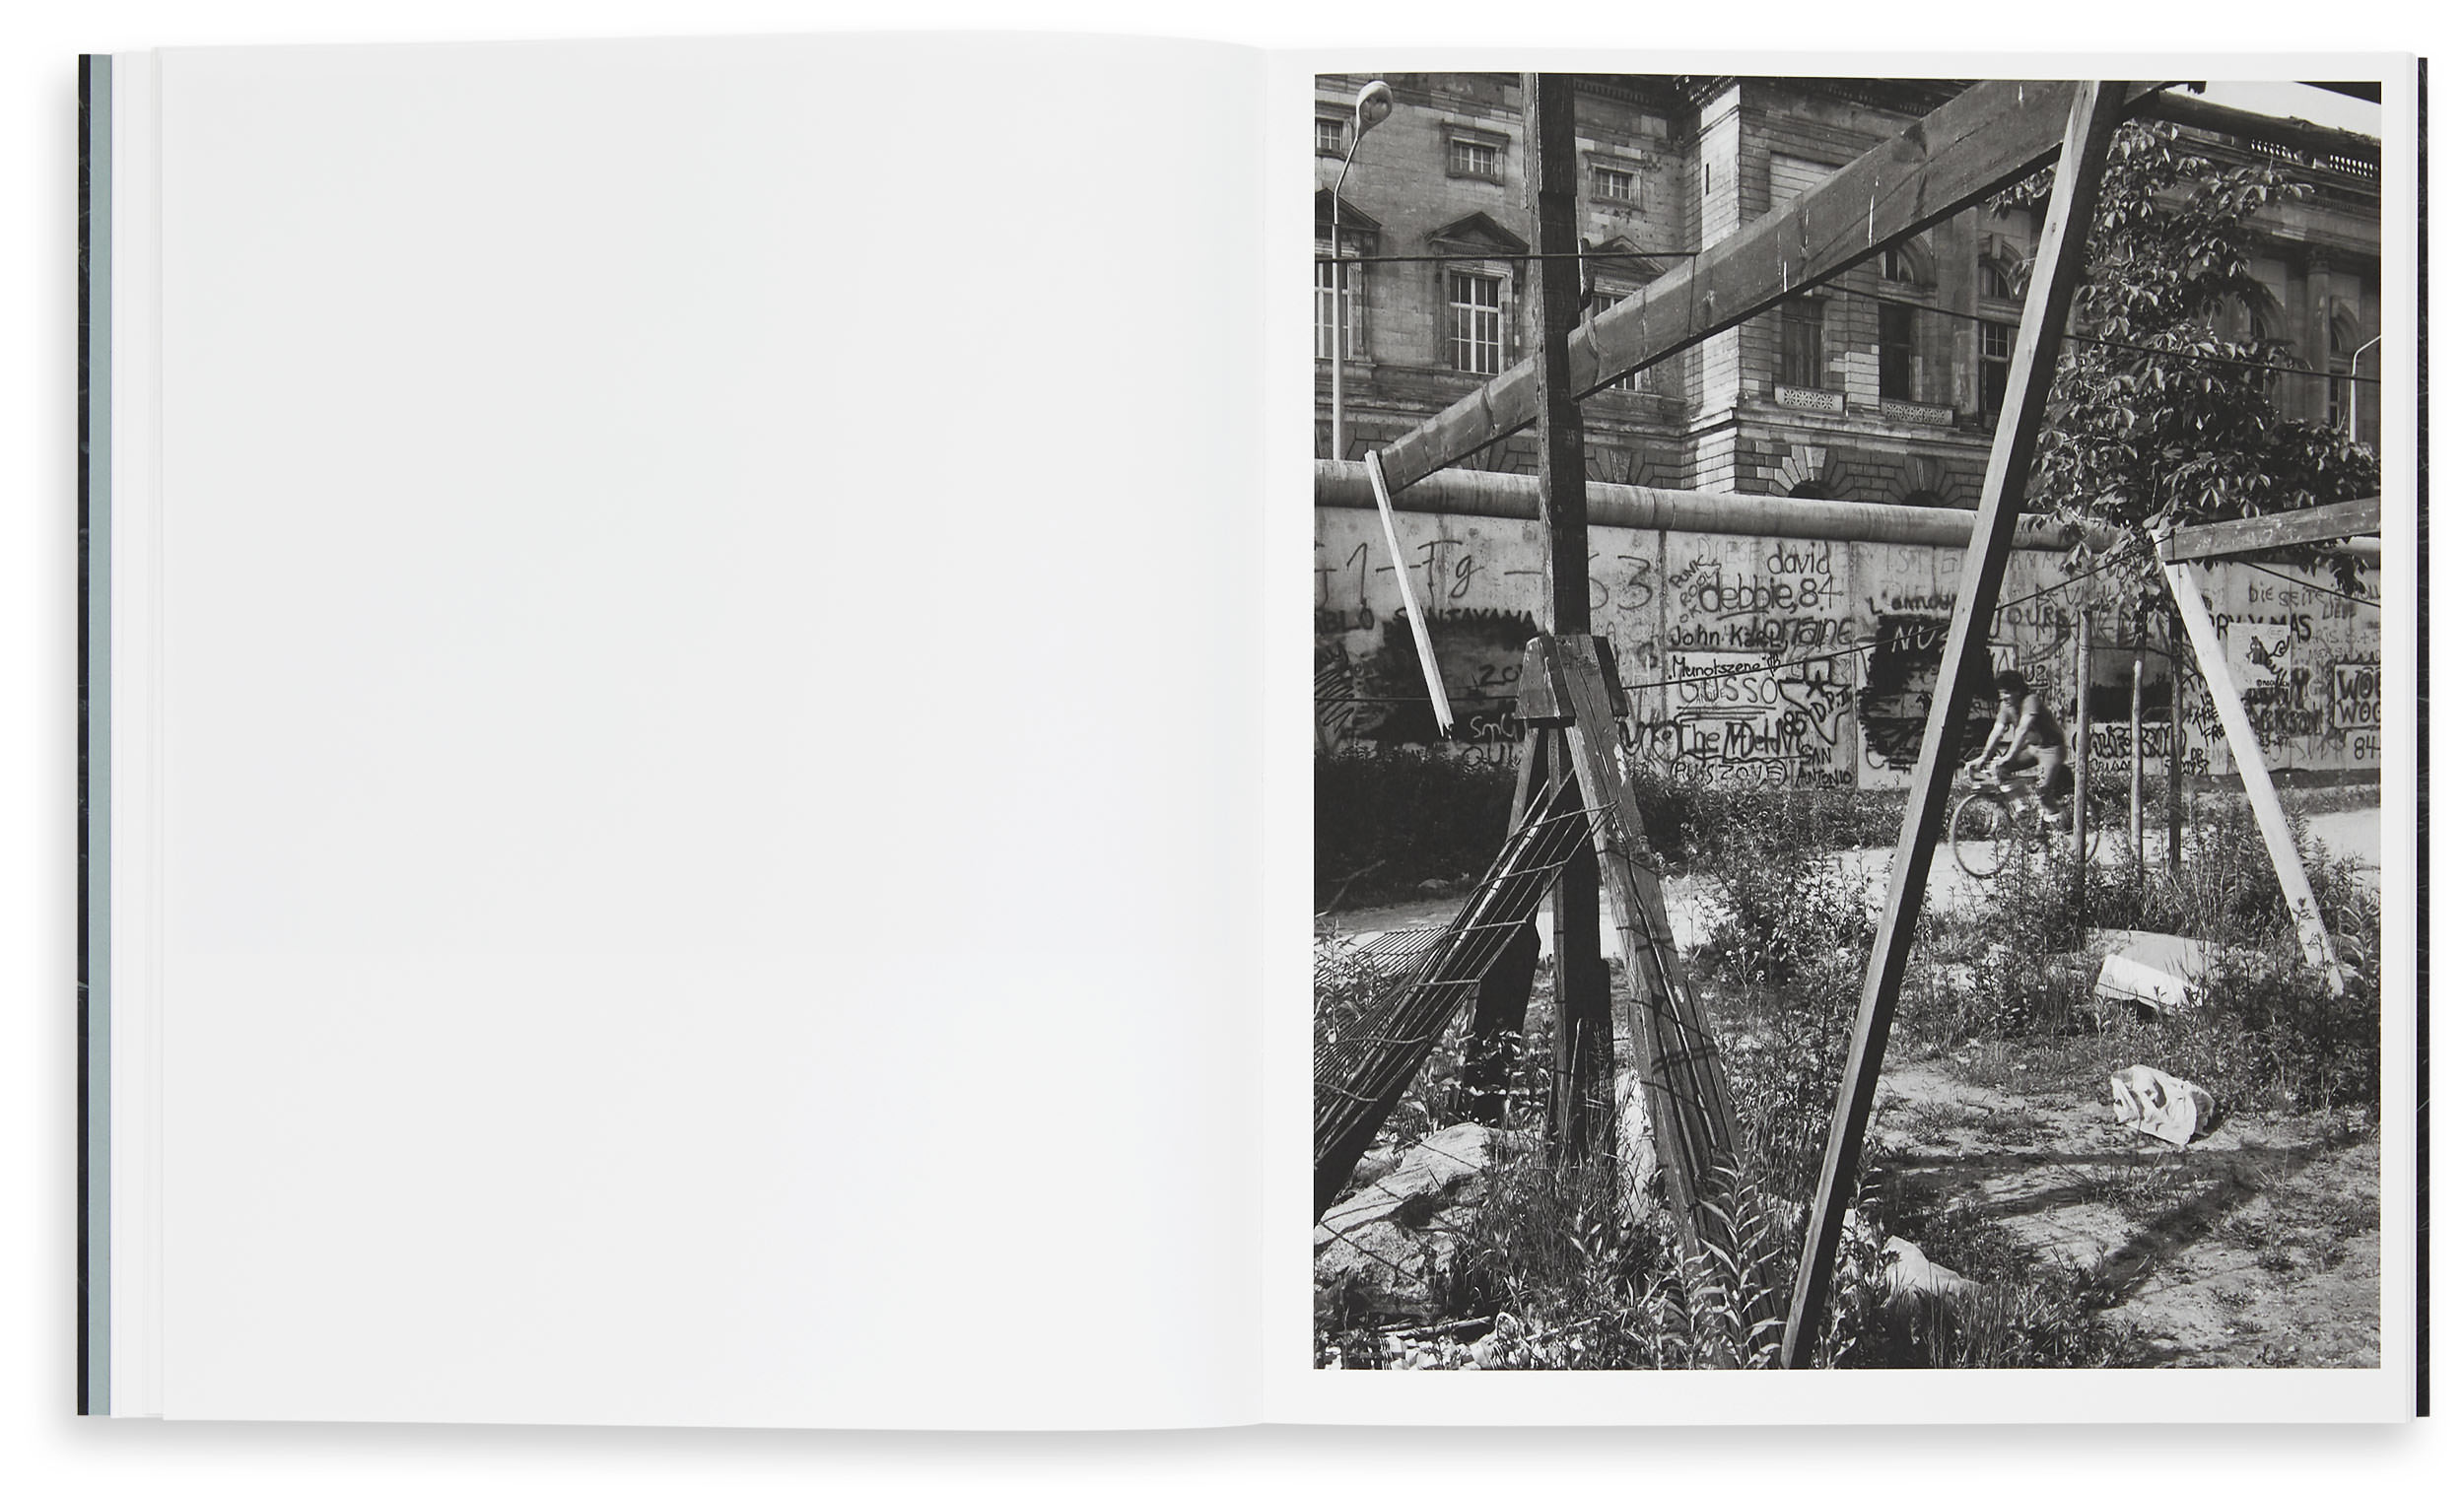 The “Topography of Terror” Site as Reflected in Contemporary Photography